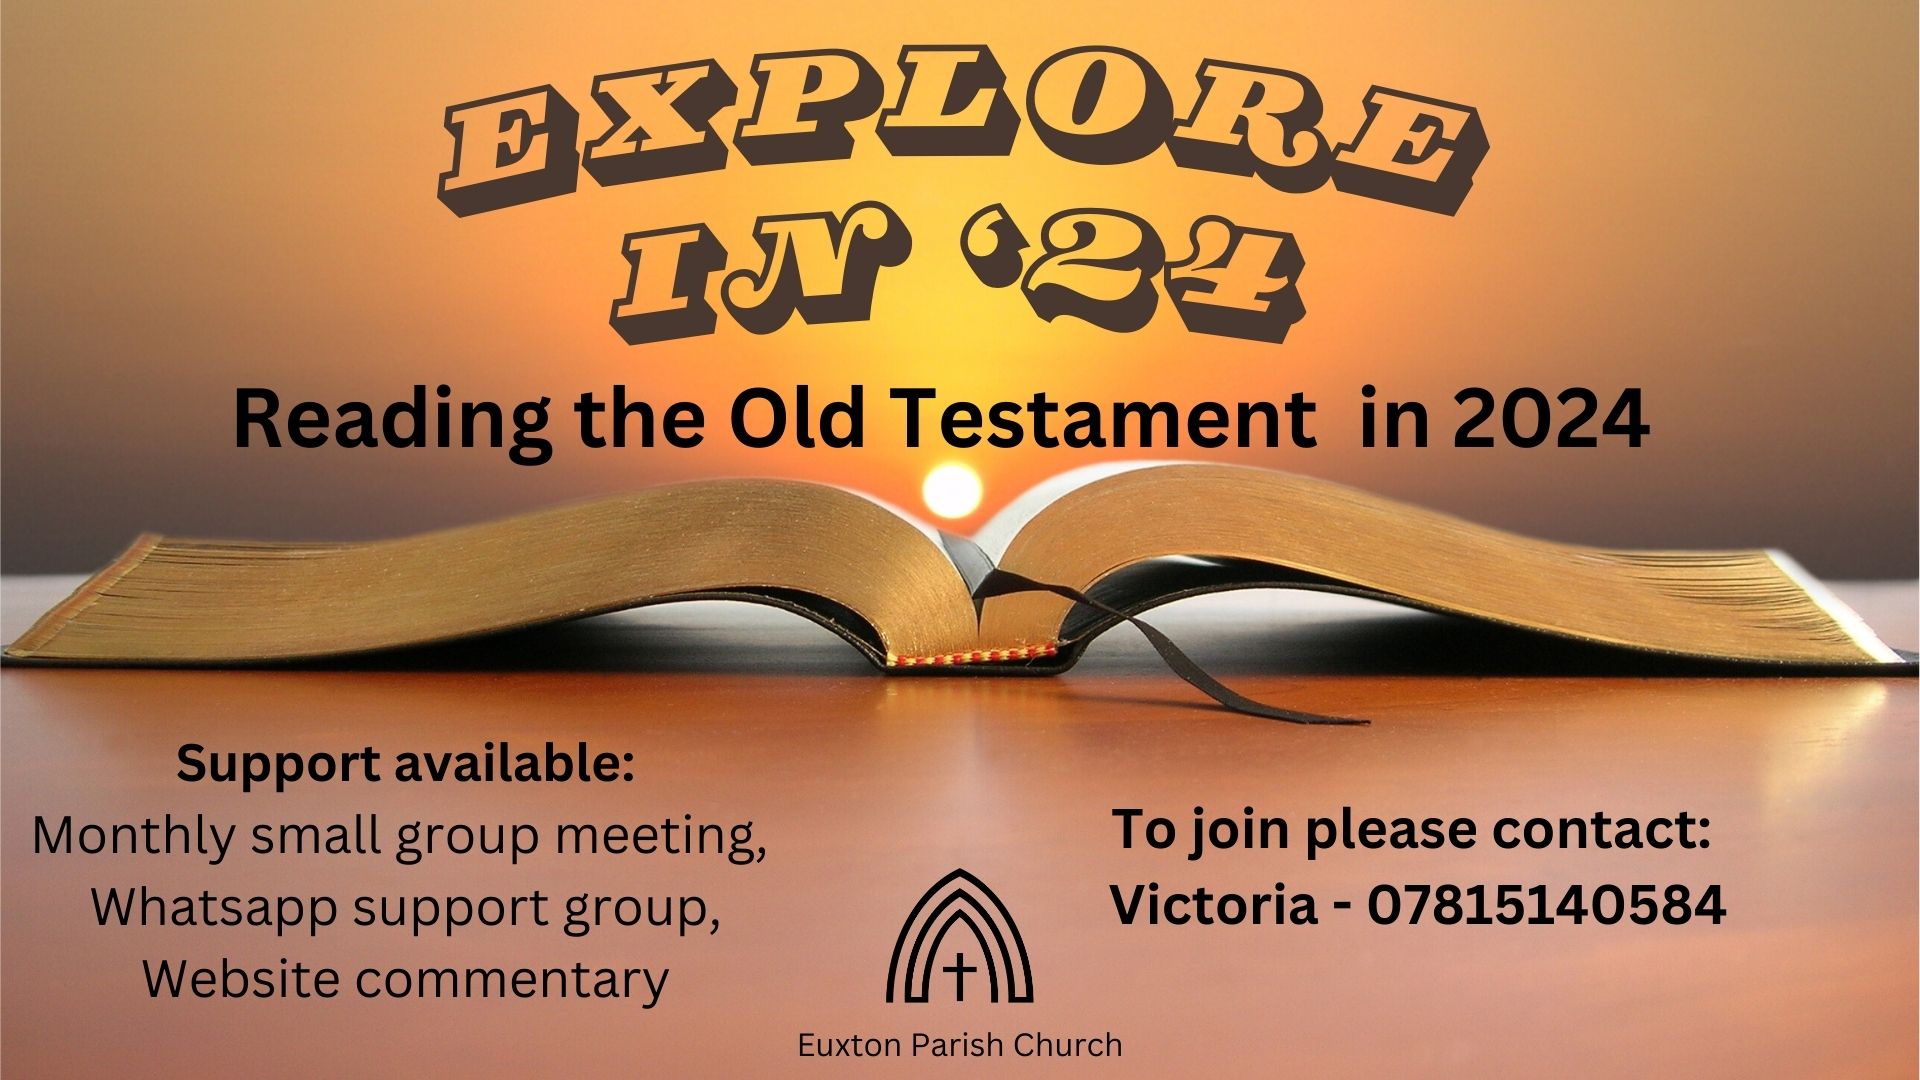 Explore in 24 - Reading of the Old Testament 